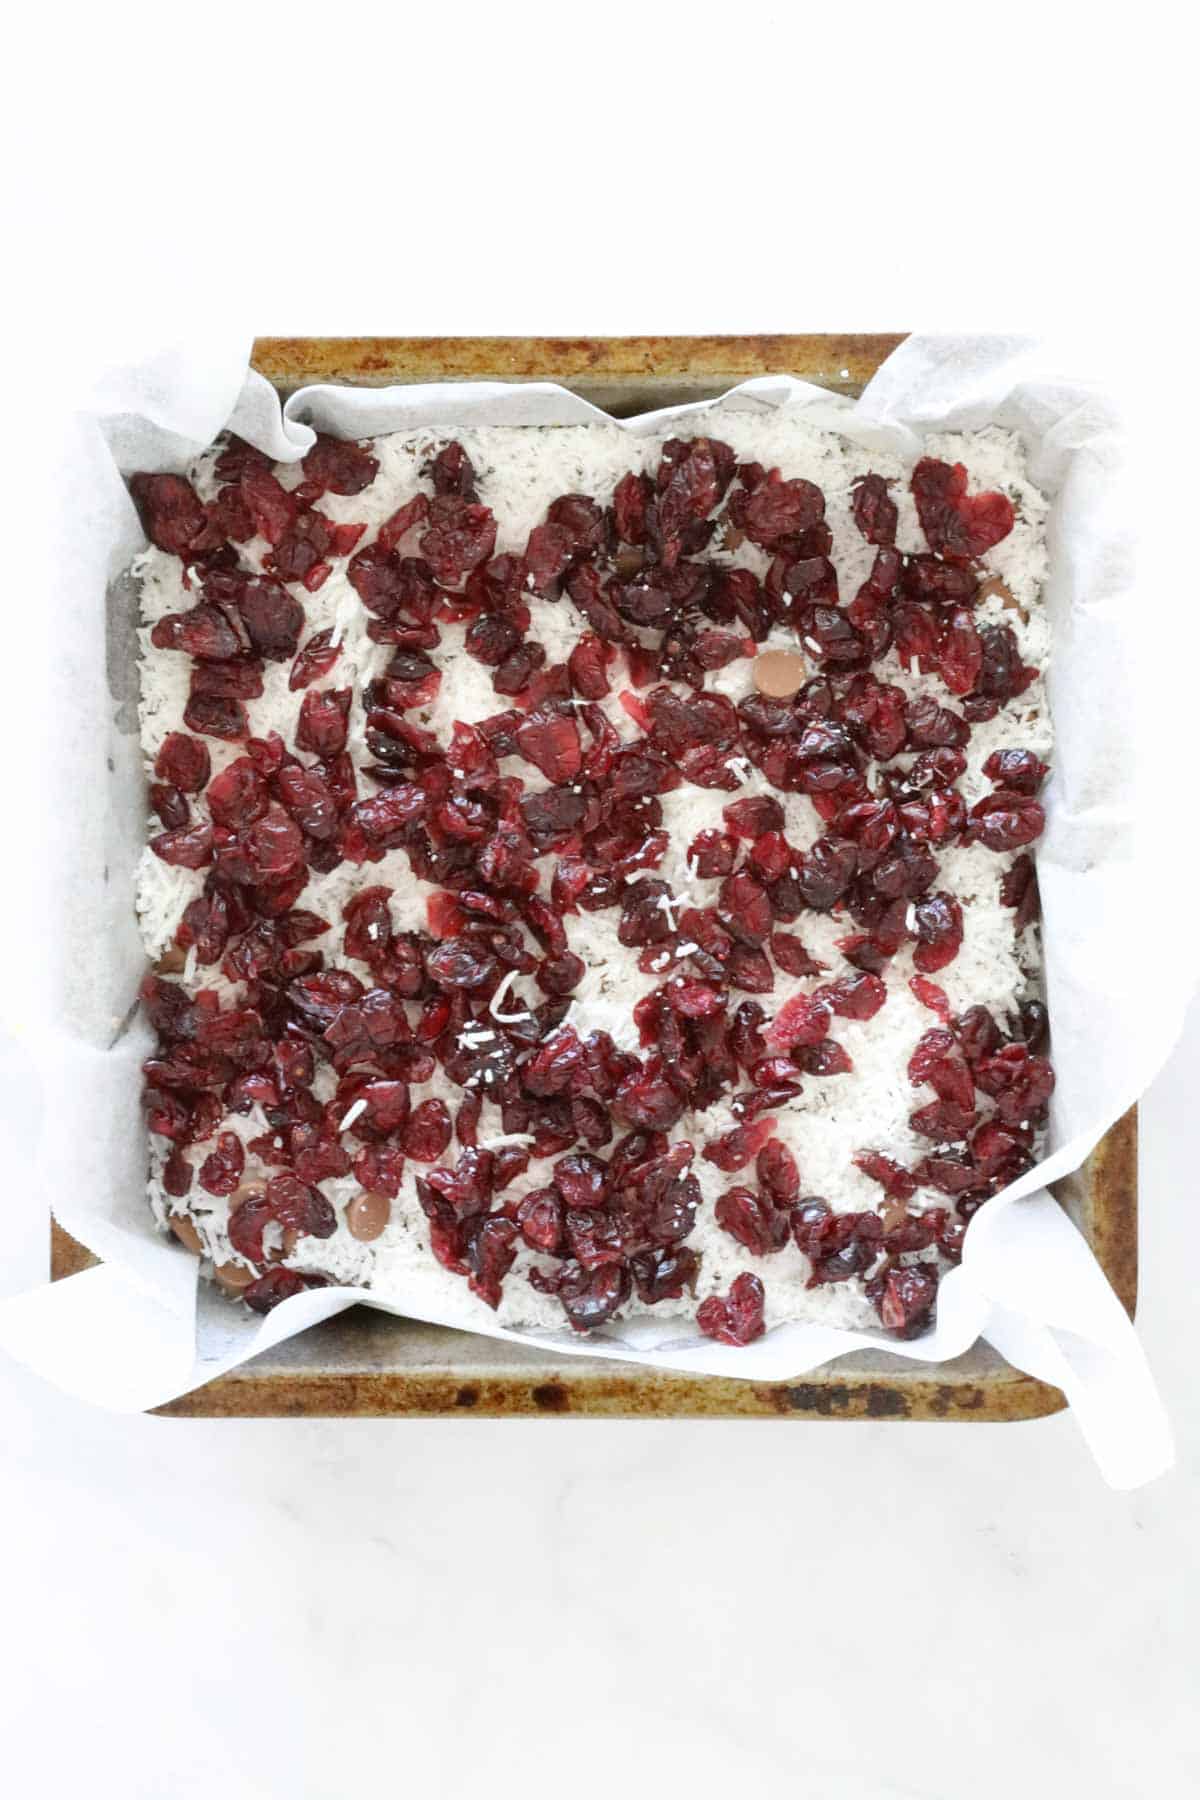 Dried cranberries sprinkled over the coconut.